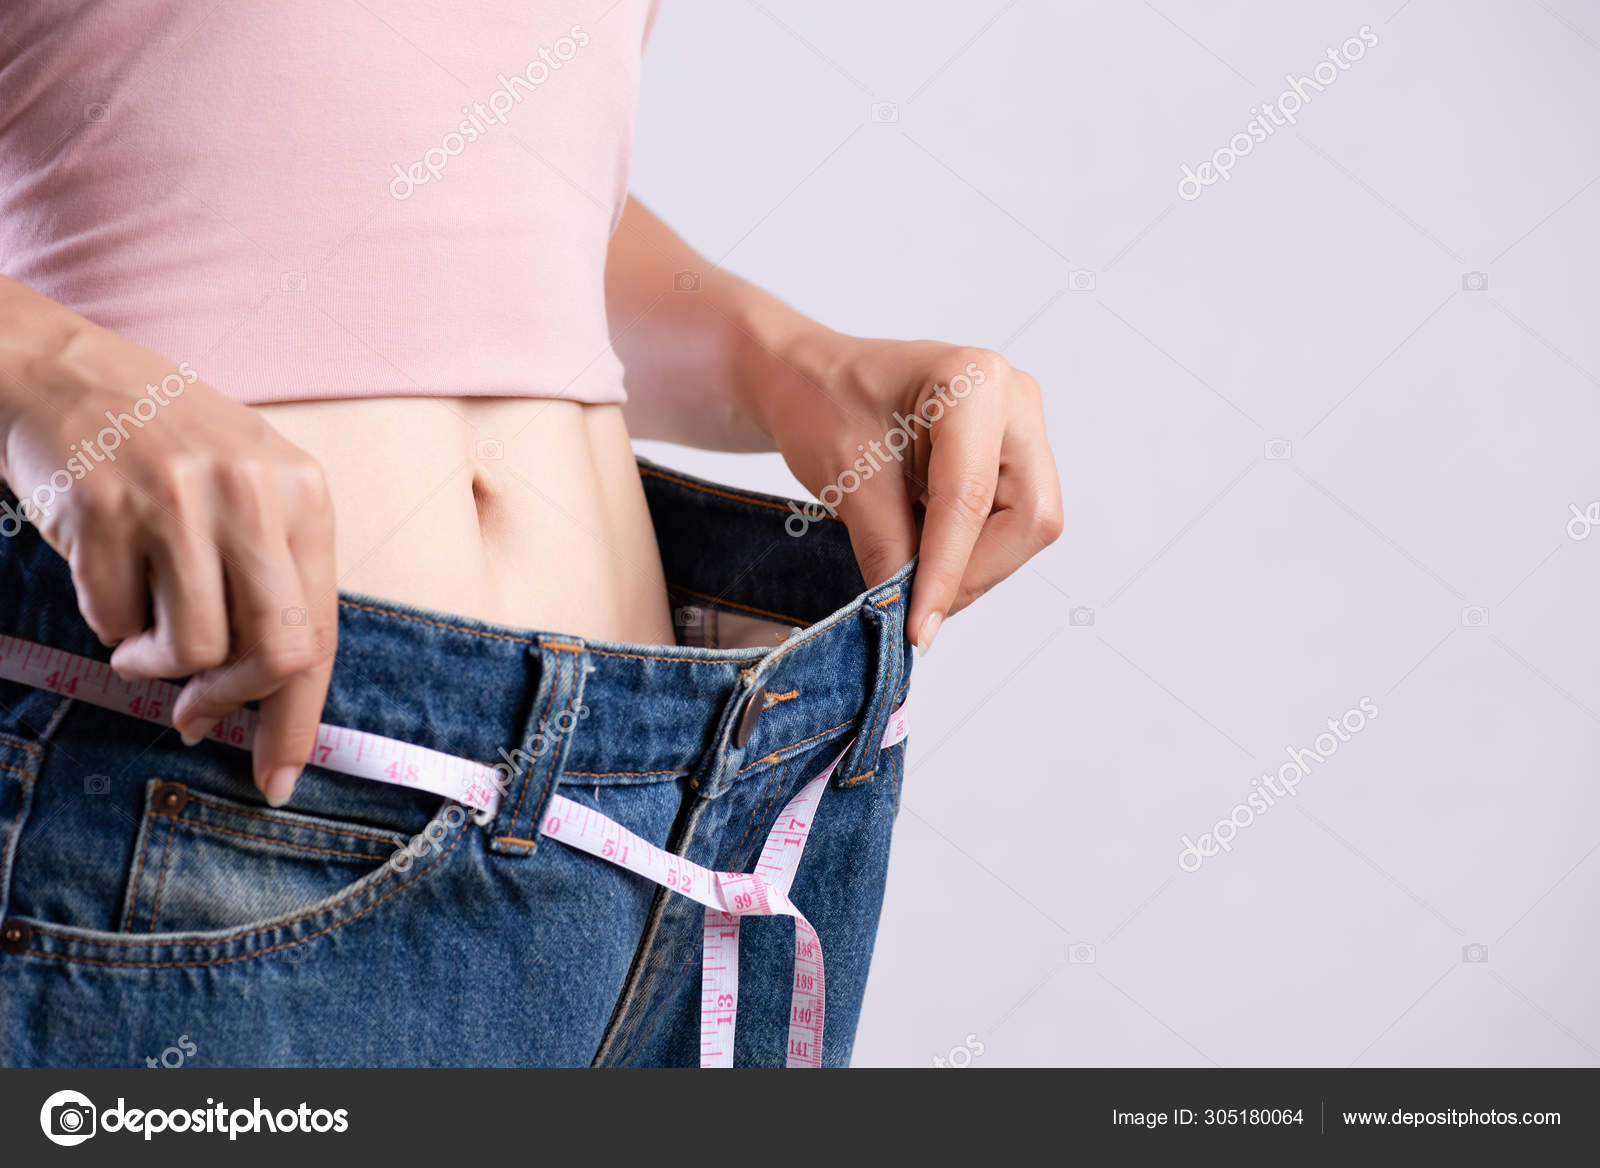 Closeup Of A Young Woman Measuring Her Waist With A Tape Measure